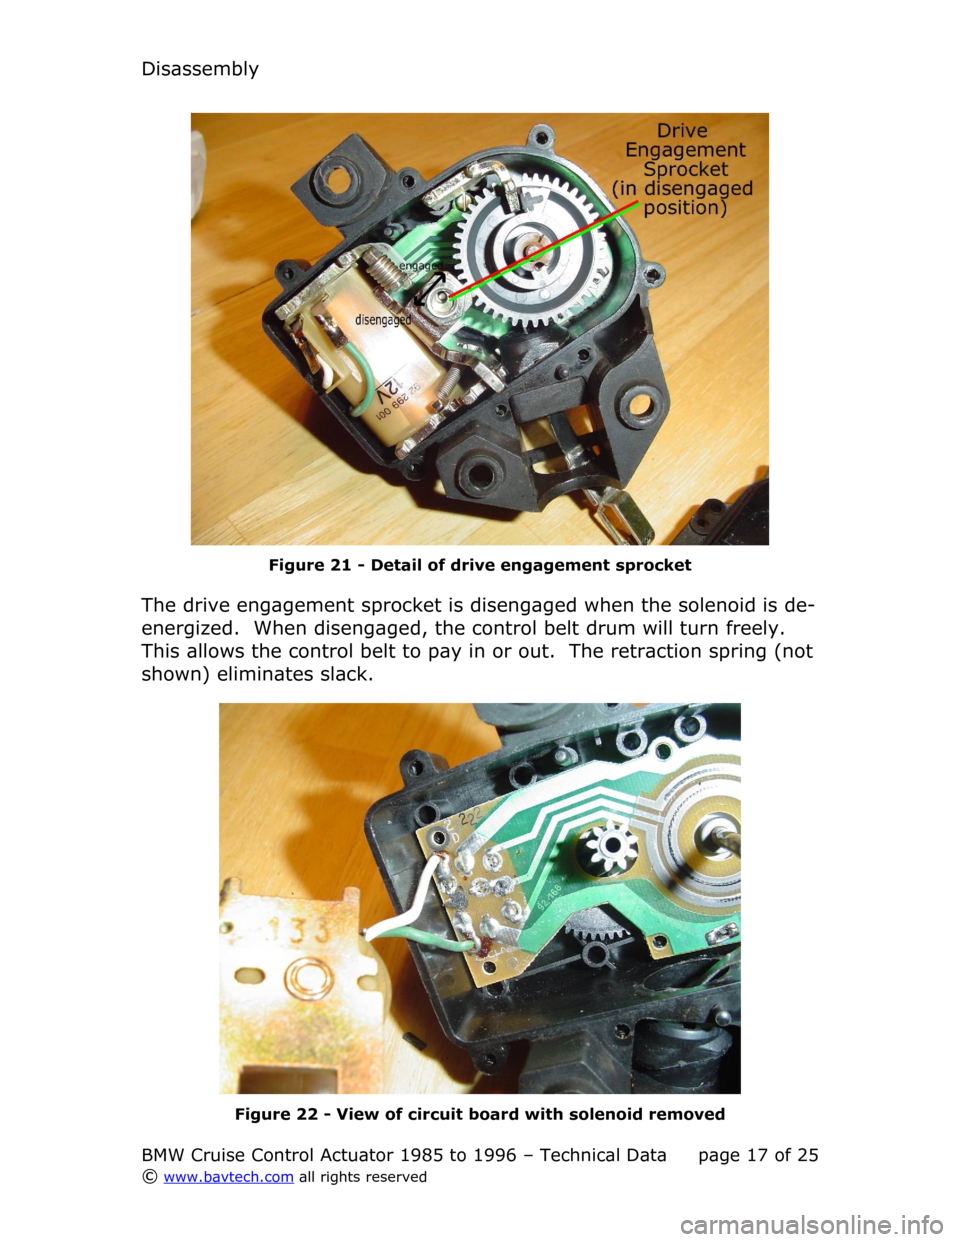 BMW 7 SERIES 1986 E32 Cruise Control Acutator Technical Data Workshop Manual Disassembly
Figure  21  - Detail of drive engagement sprocket
The drive engagement sprocket is disengaged when the solenoid is de-
energized.  When disengaged, the control belt drum will turn freely. 